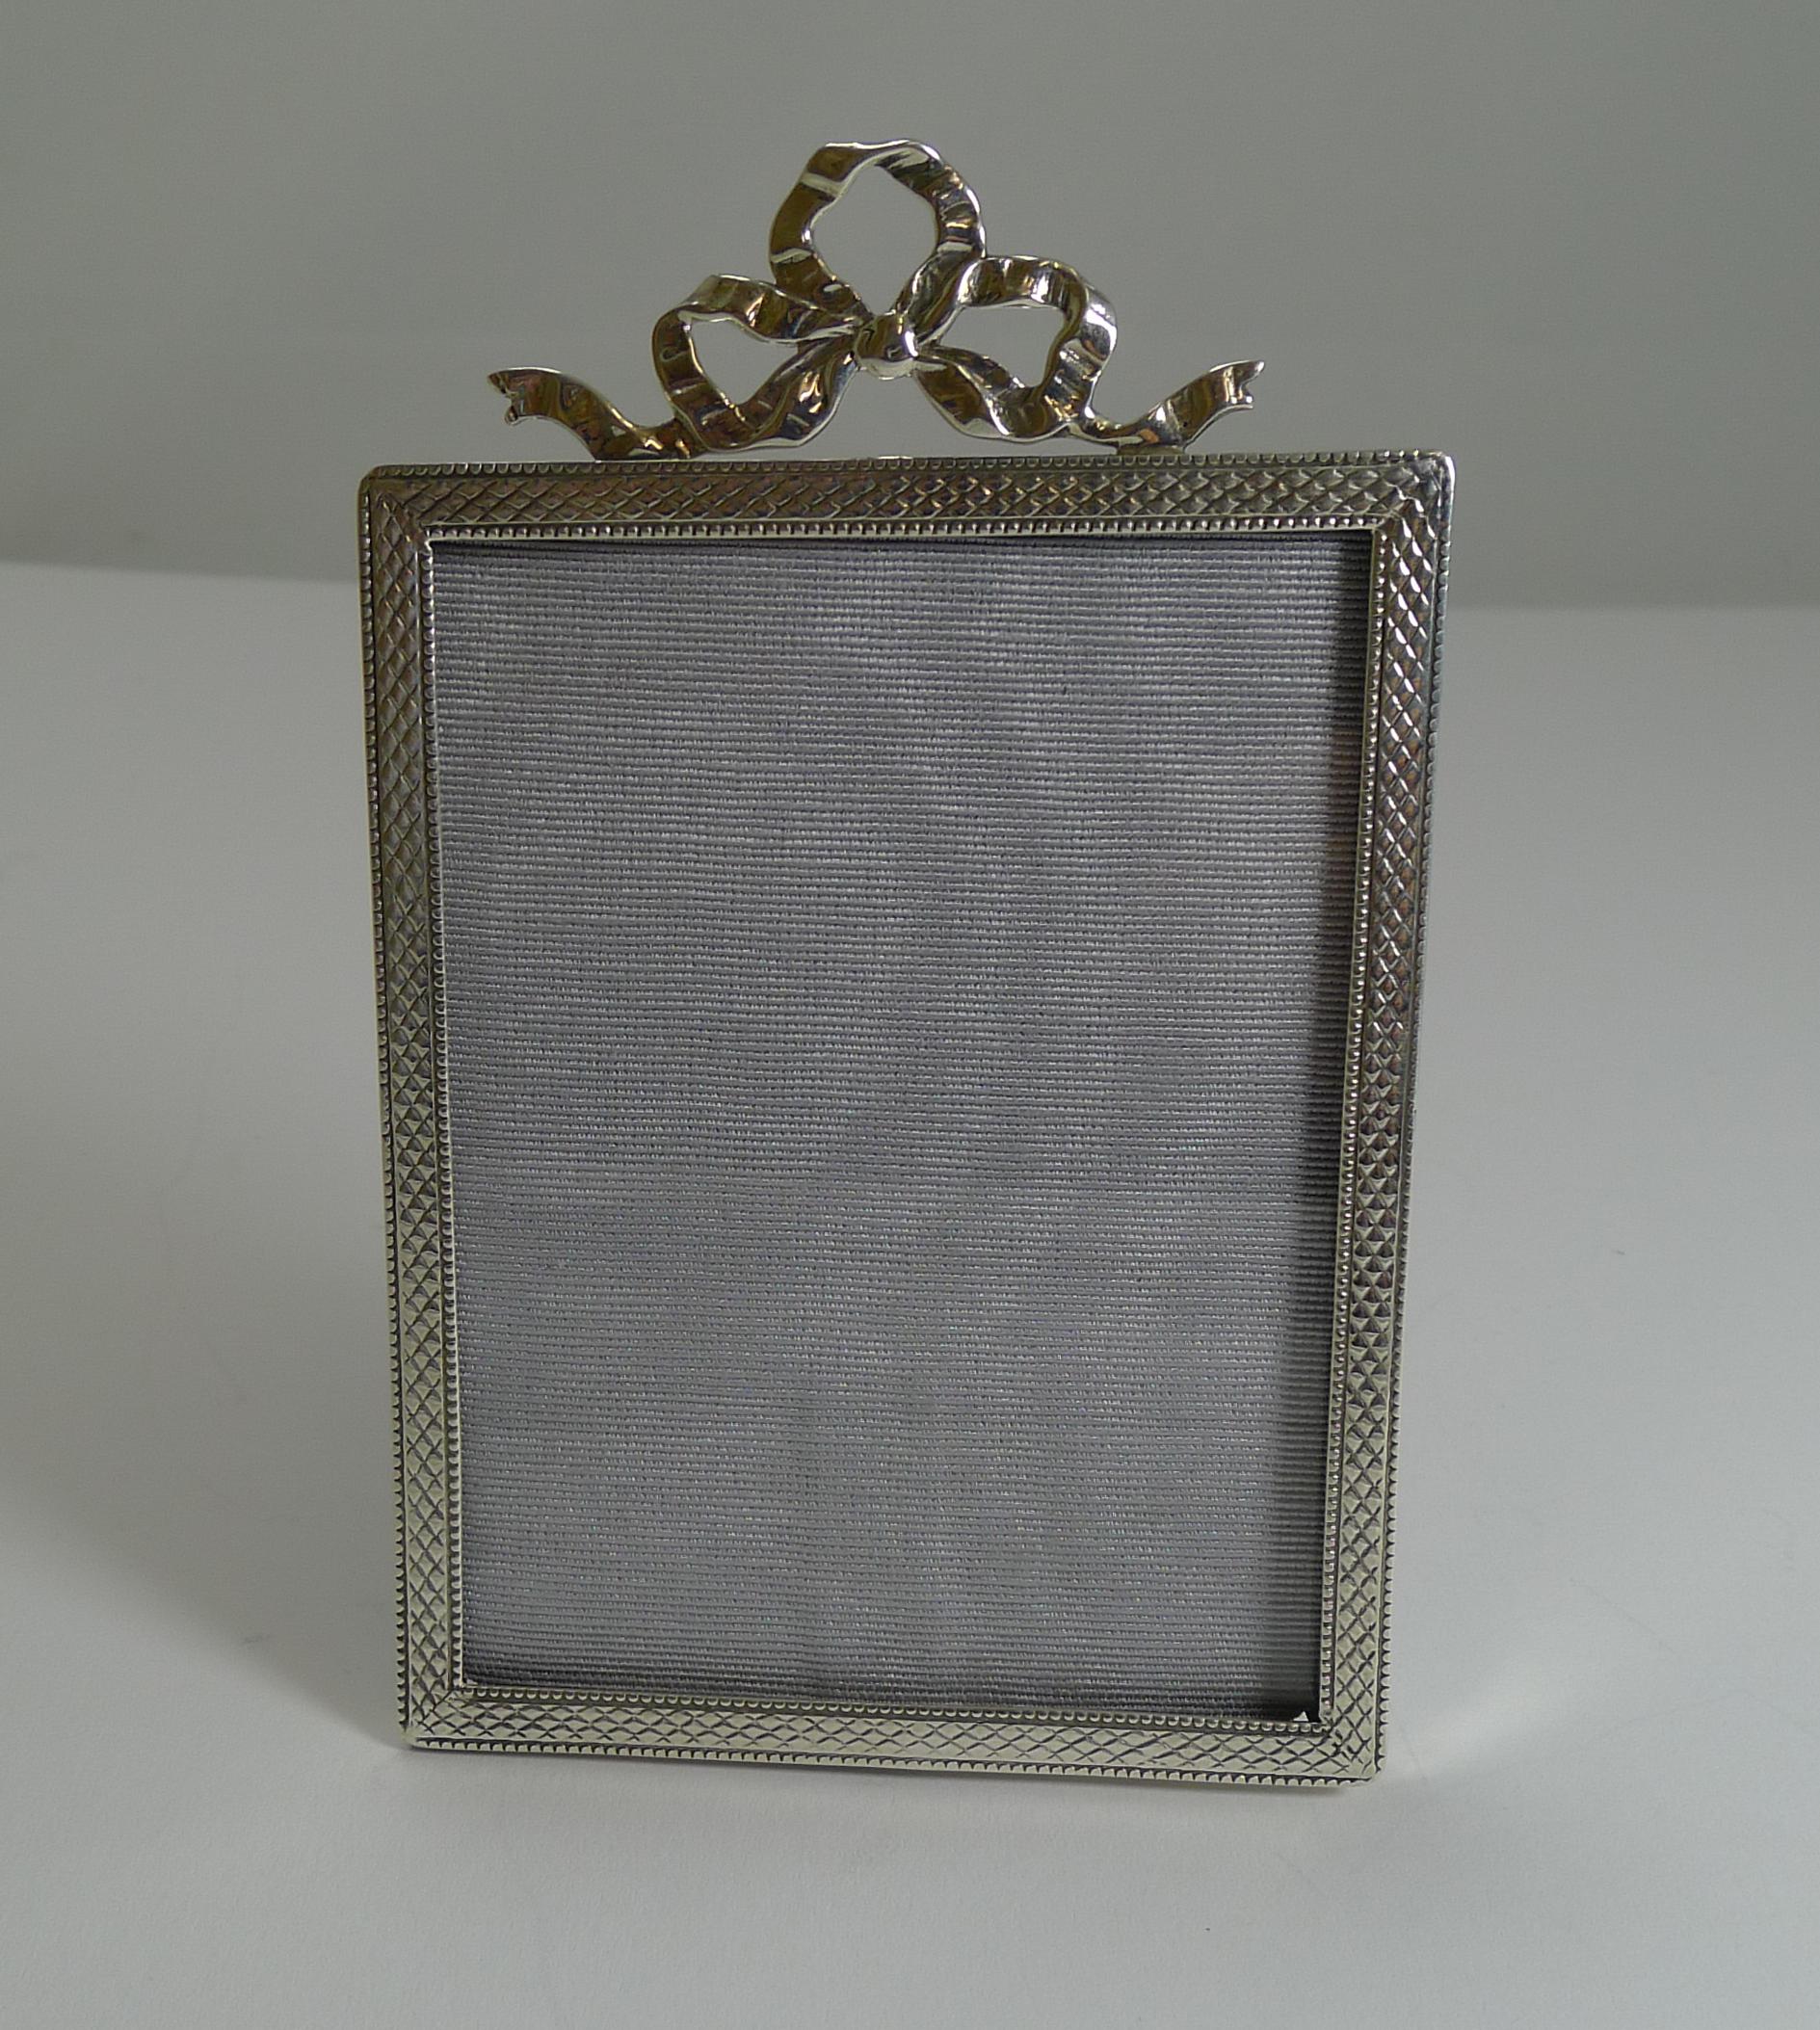 Pretty as a picture, this English sterling silver photograph frame approaches 100 years old with a full hallmark for Birmingham 1920.

The frame is beautifully decorated with a pretty engine-turned design and topped with a stunning cast ribbon and